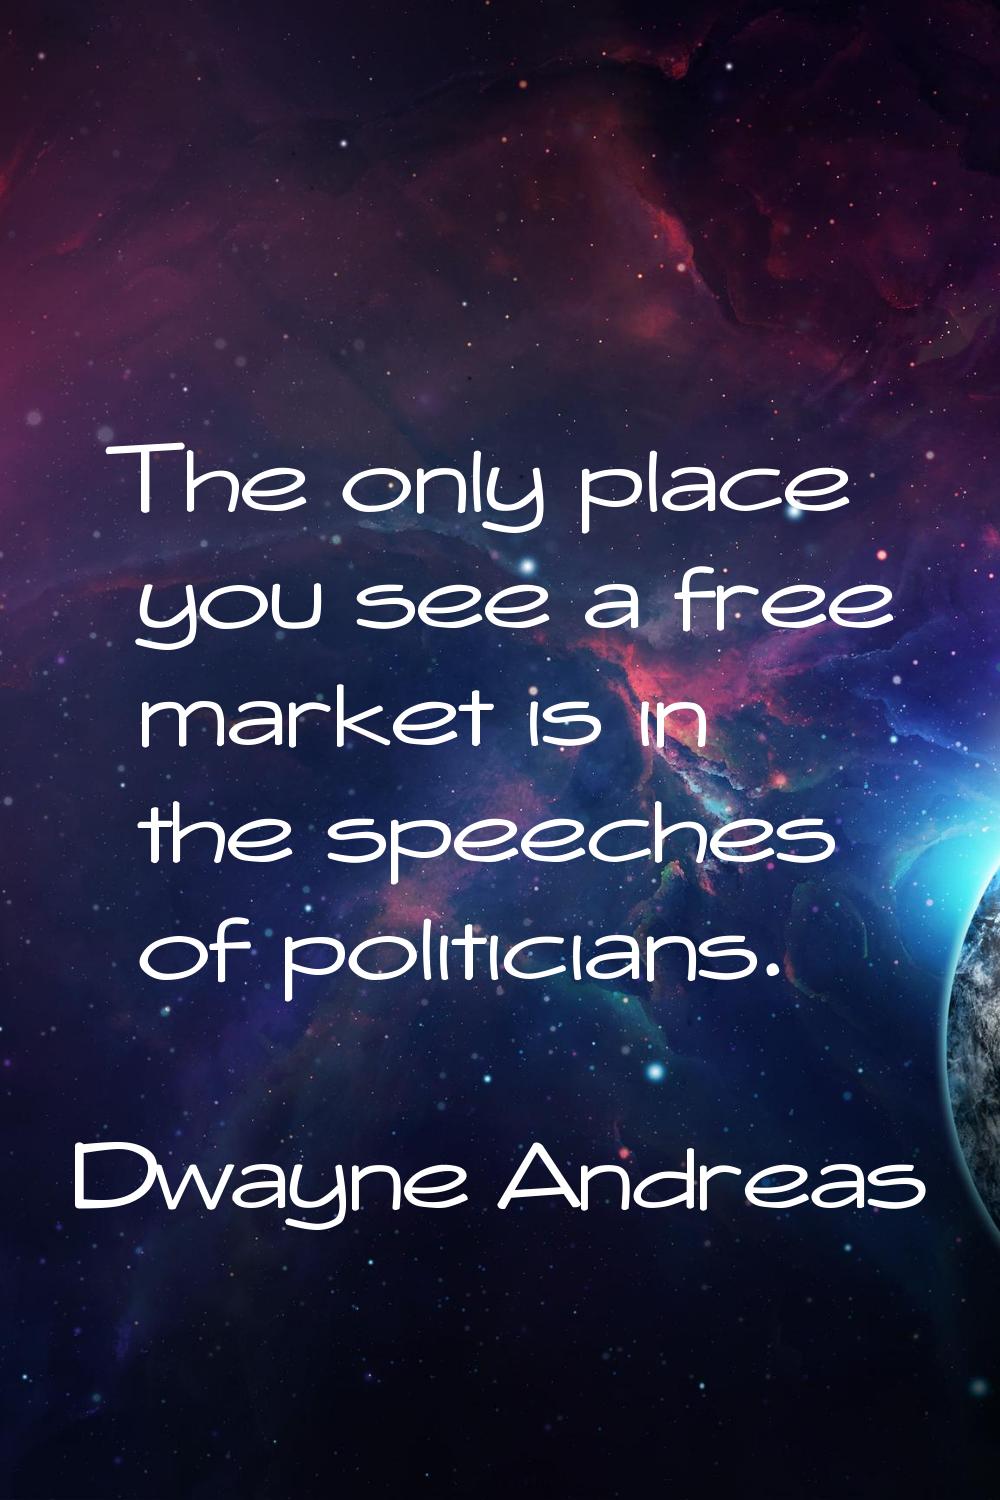 The only place you see a free market is in the speeches of politicians.